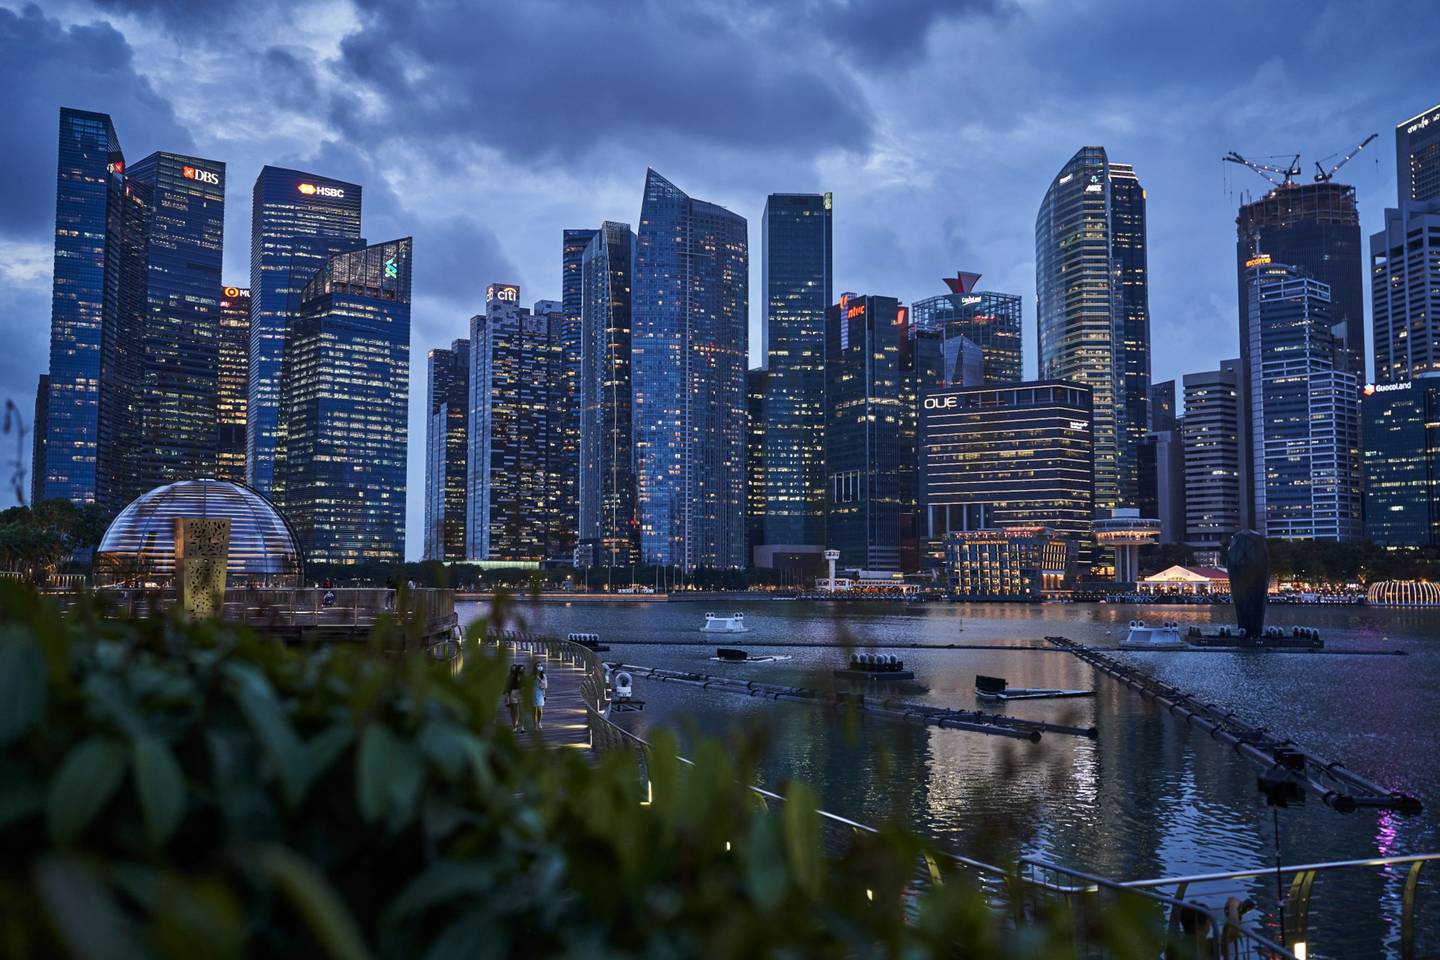 Buildings illuminated at dusk in the central business district (CBD) of Singapore, on Thursday, Jan. 28, 2021.